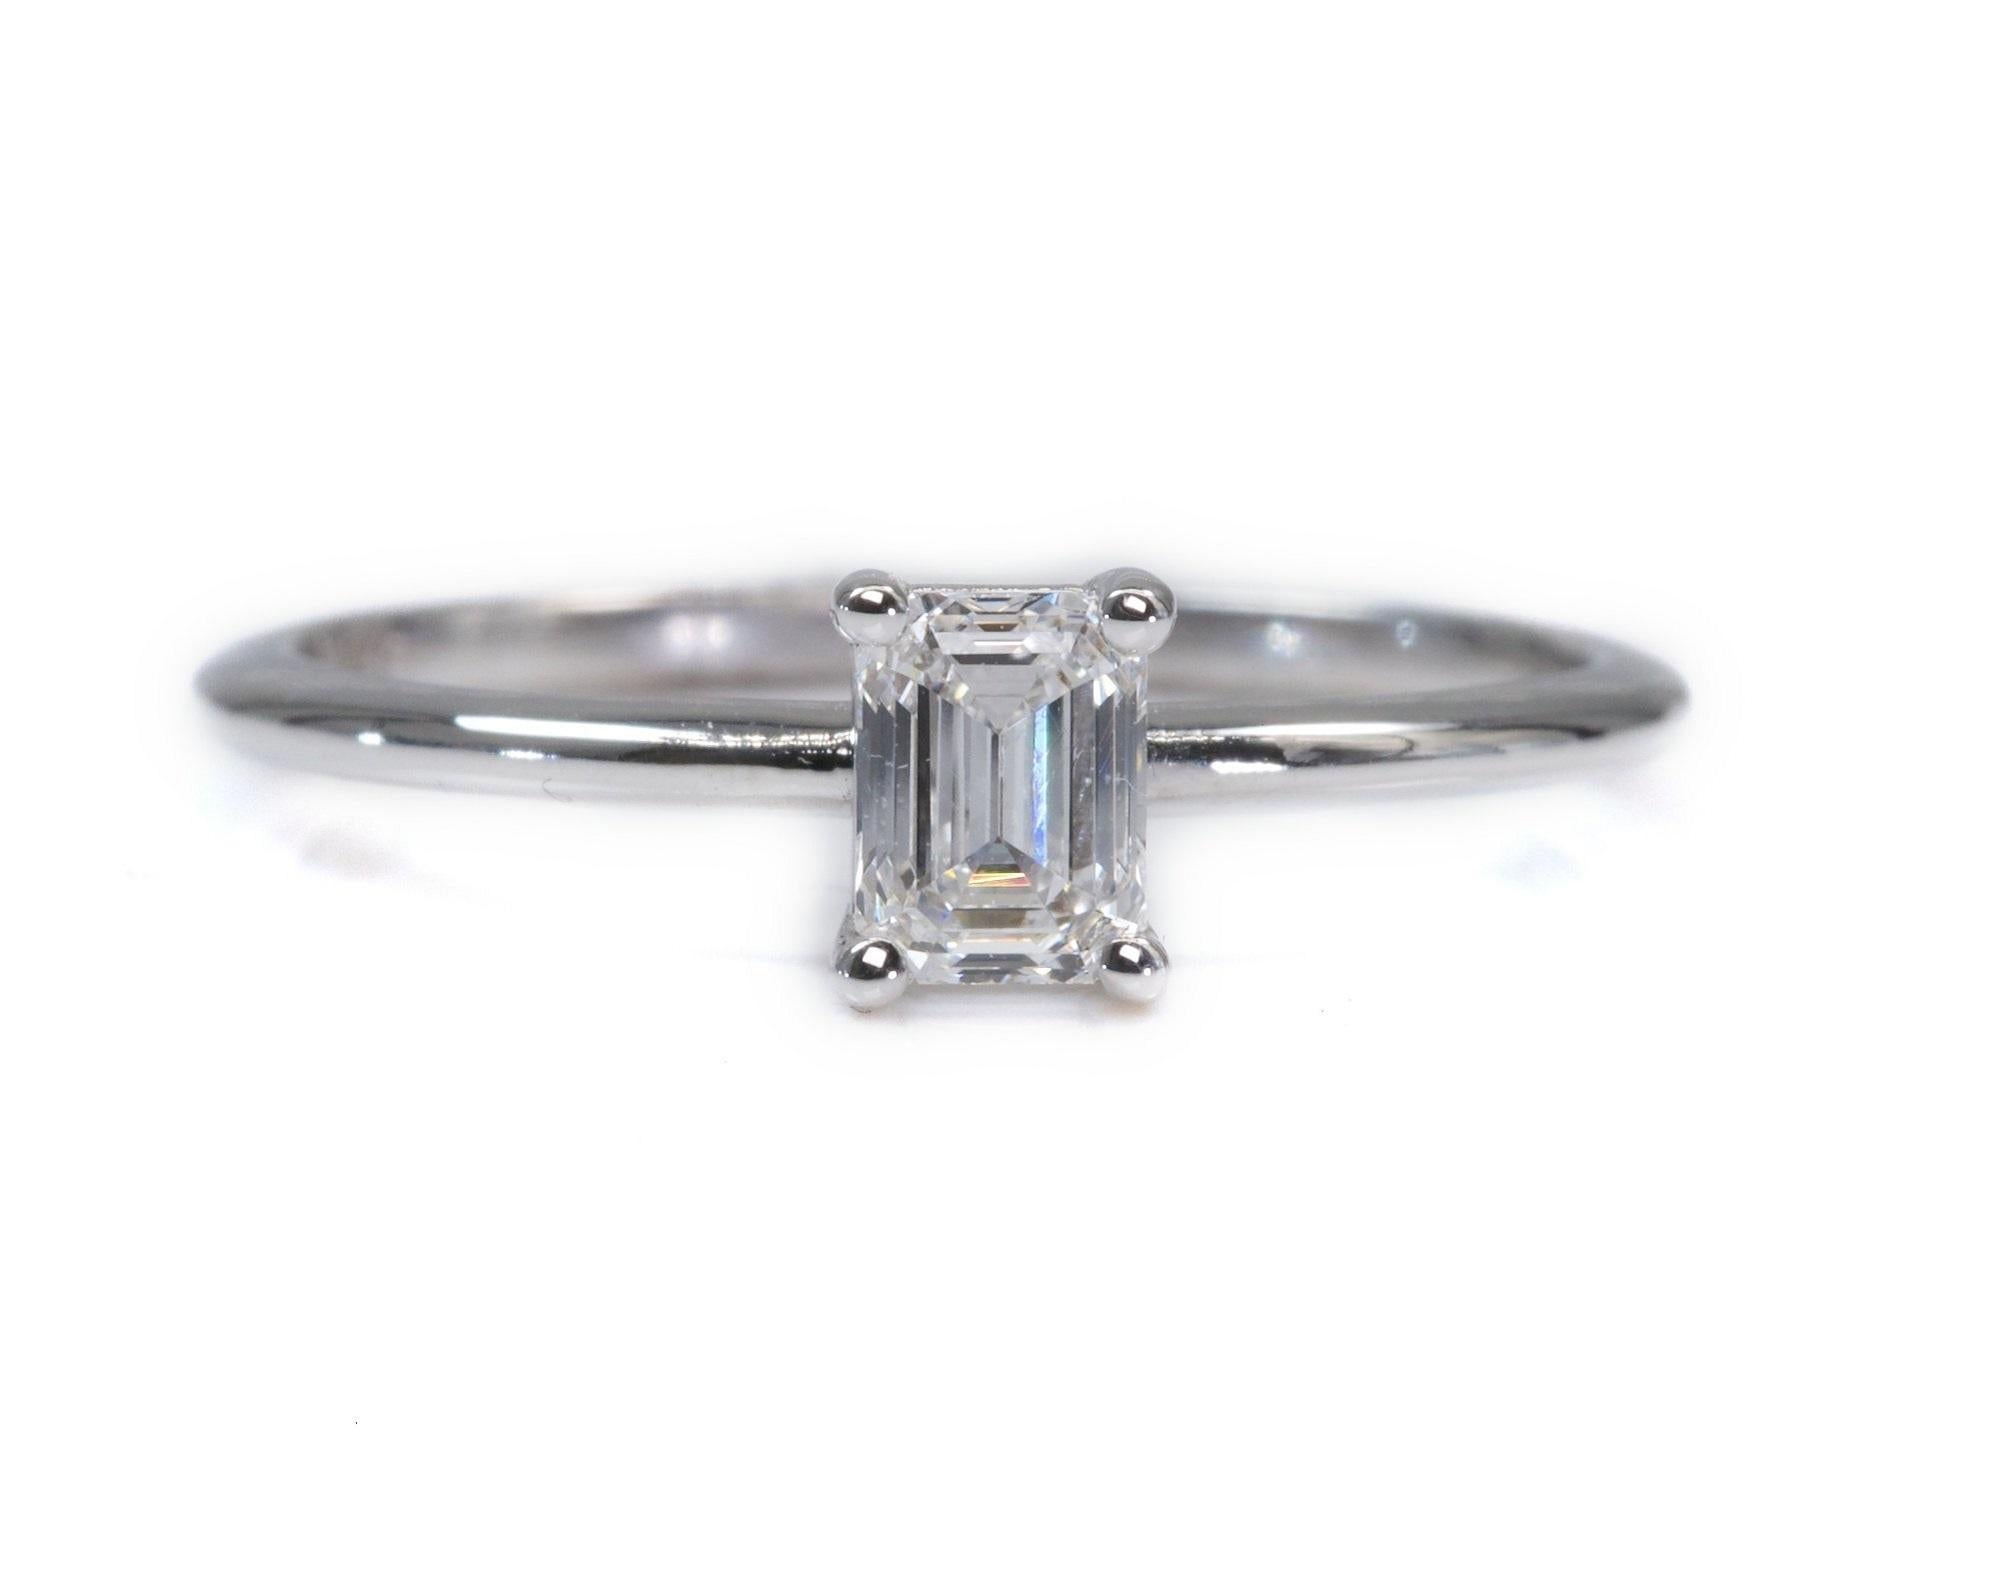 A beautiful classic engagement ring with a dazzling 0.86 carat emerald cut natural diamond. The setting is made of 18K white gold with a high quality polish. The main stone has a laser inscription and an IGI Certificate. It comes with a fancy